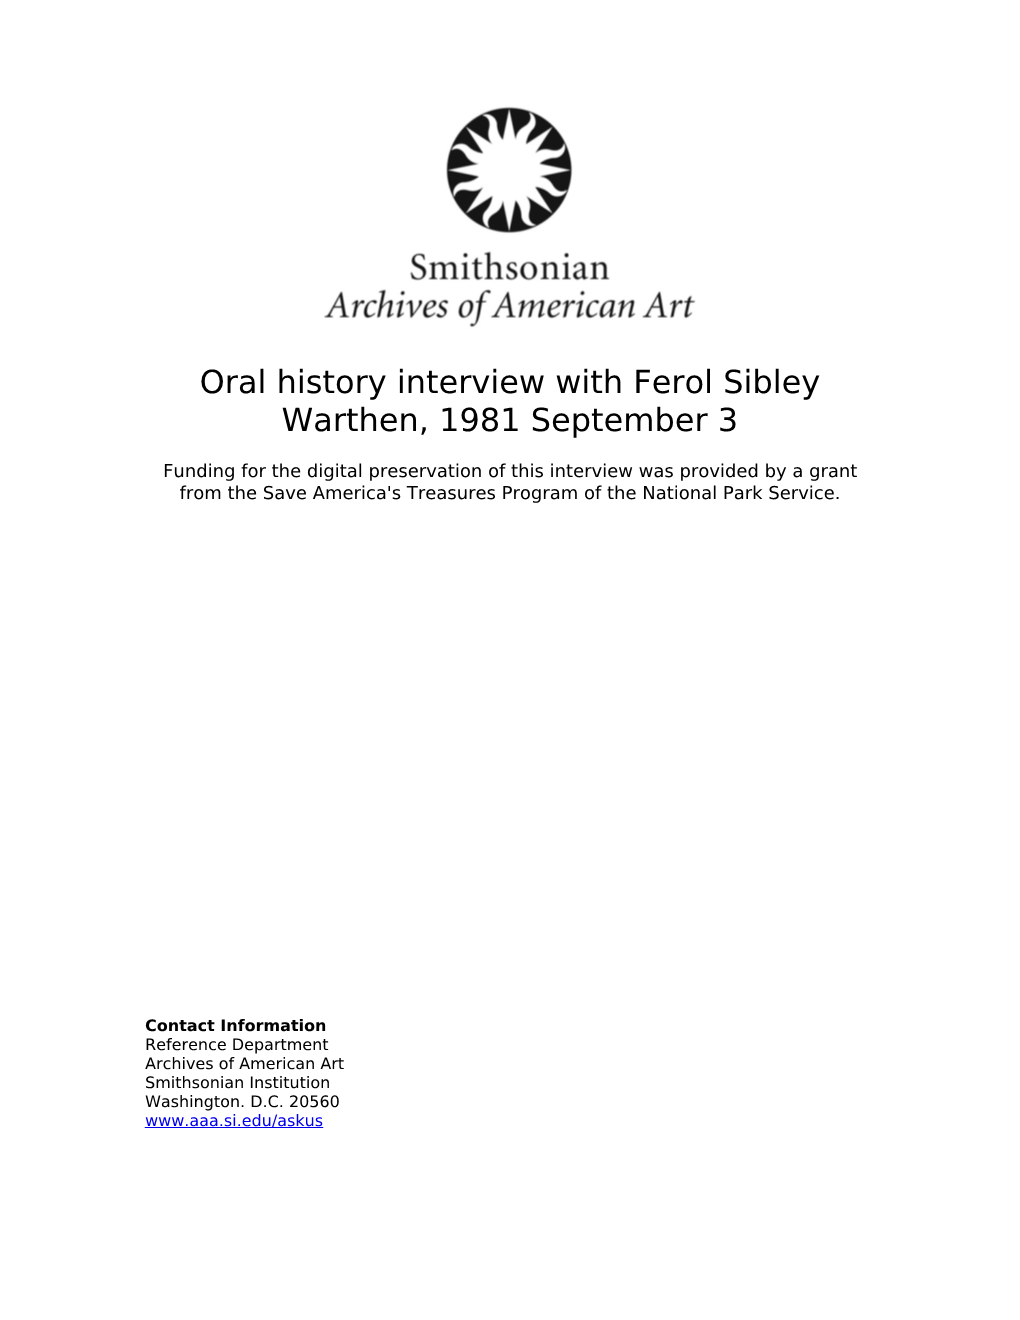 Oral History Interview with Ferol Sibley Warthen, 1981 September 3